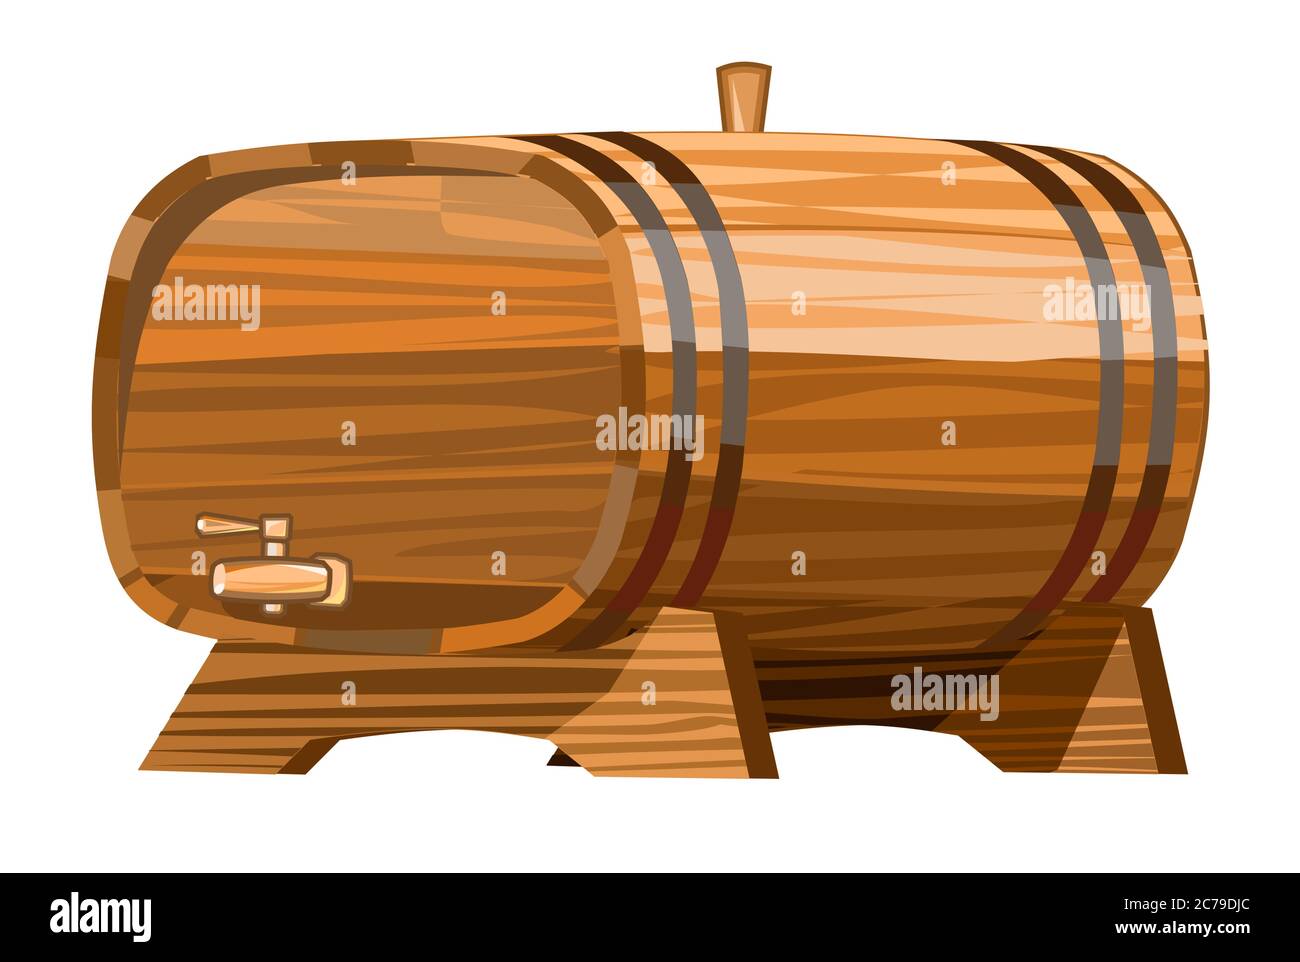 A barrel of wine or beer. Vector. Wooden barrel for alcohol. Isolated object on a transparent background. Cartoons flat style. Stock Vector